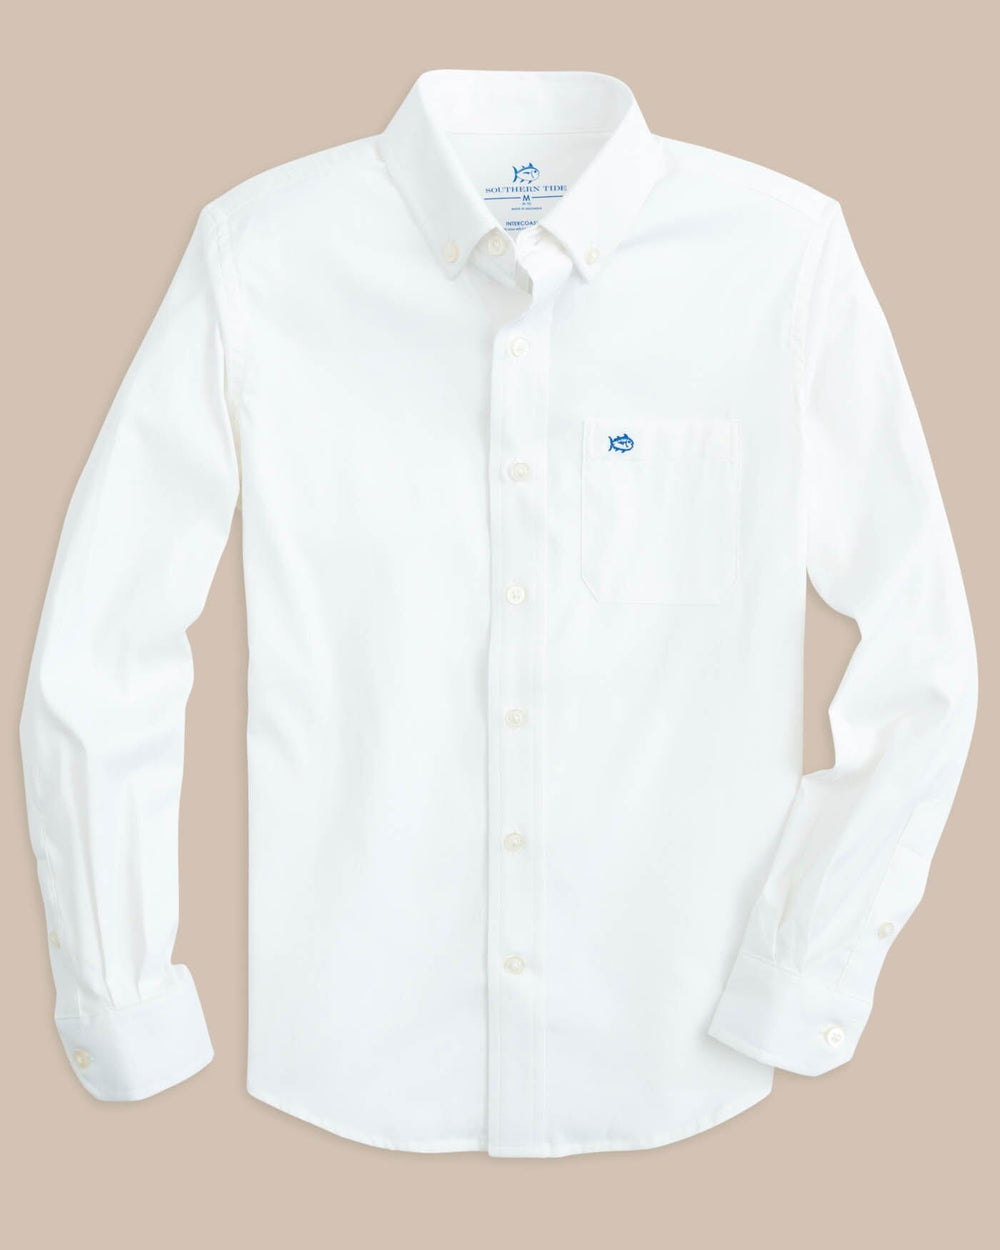 The flat front of the Boys Solid Intercoastal Button Down Shirt by Southern Tide - Classic White